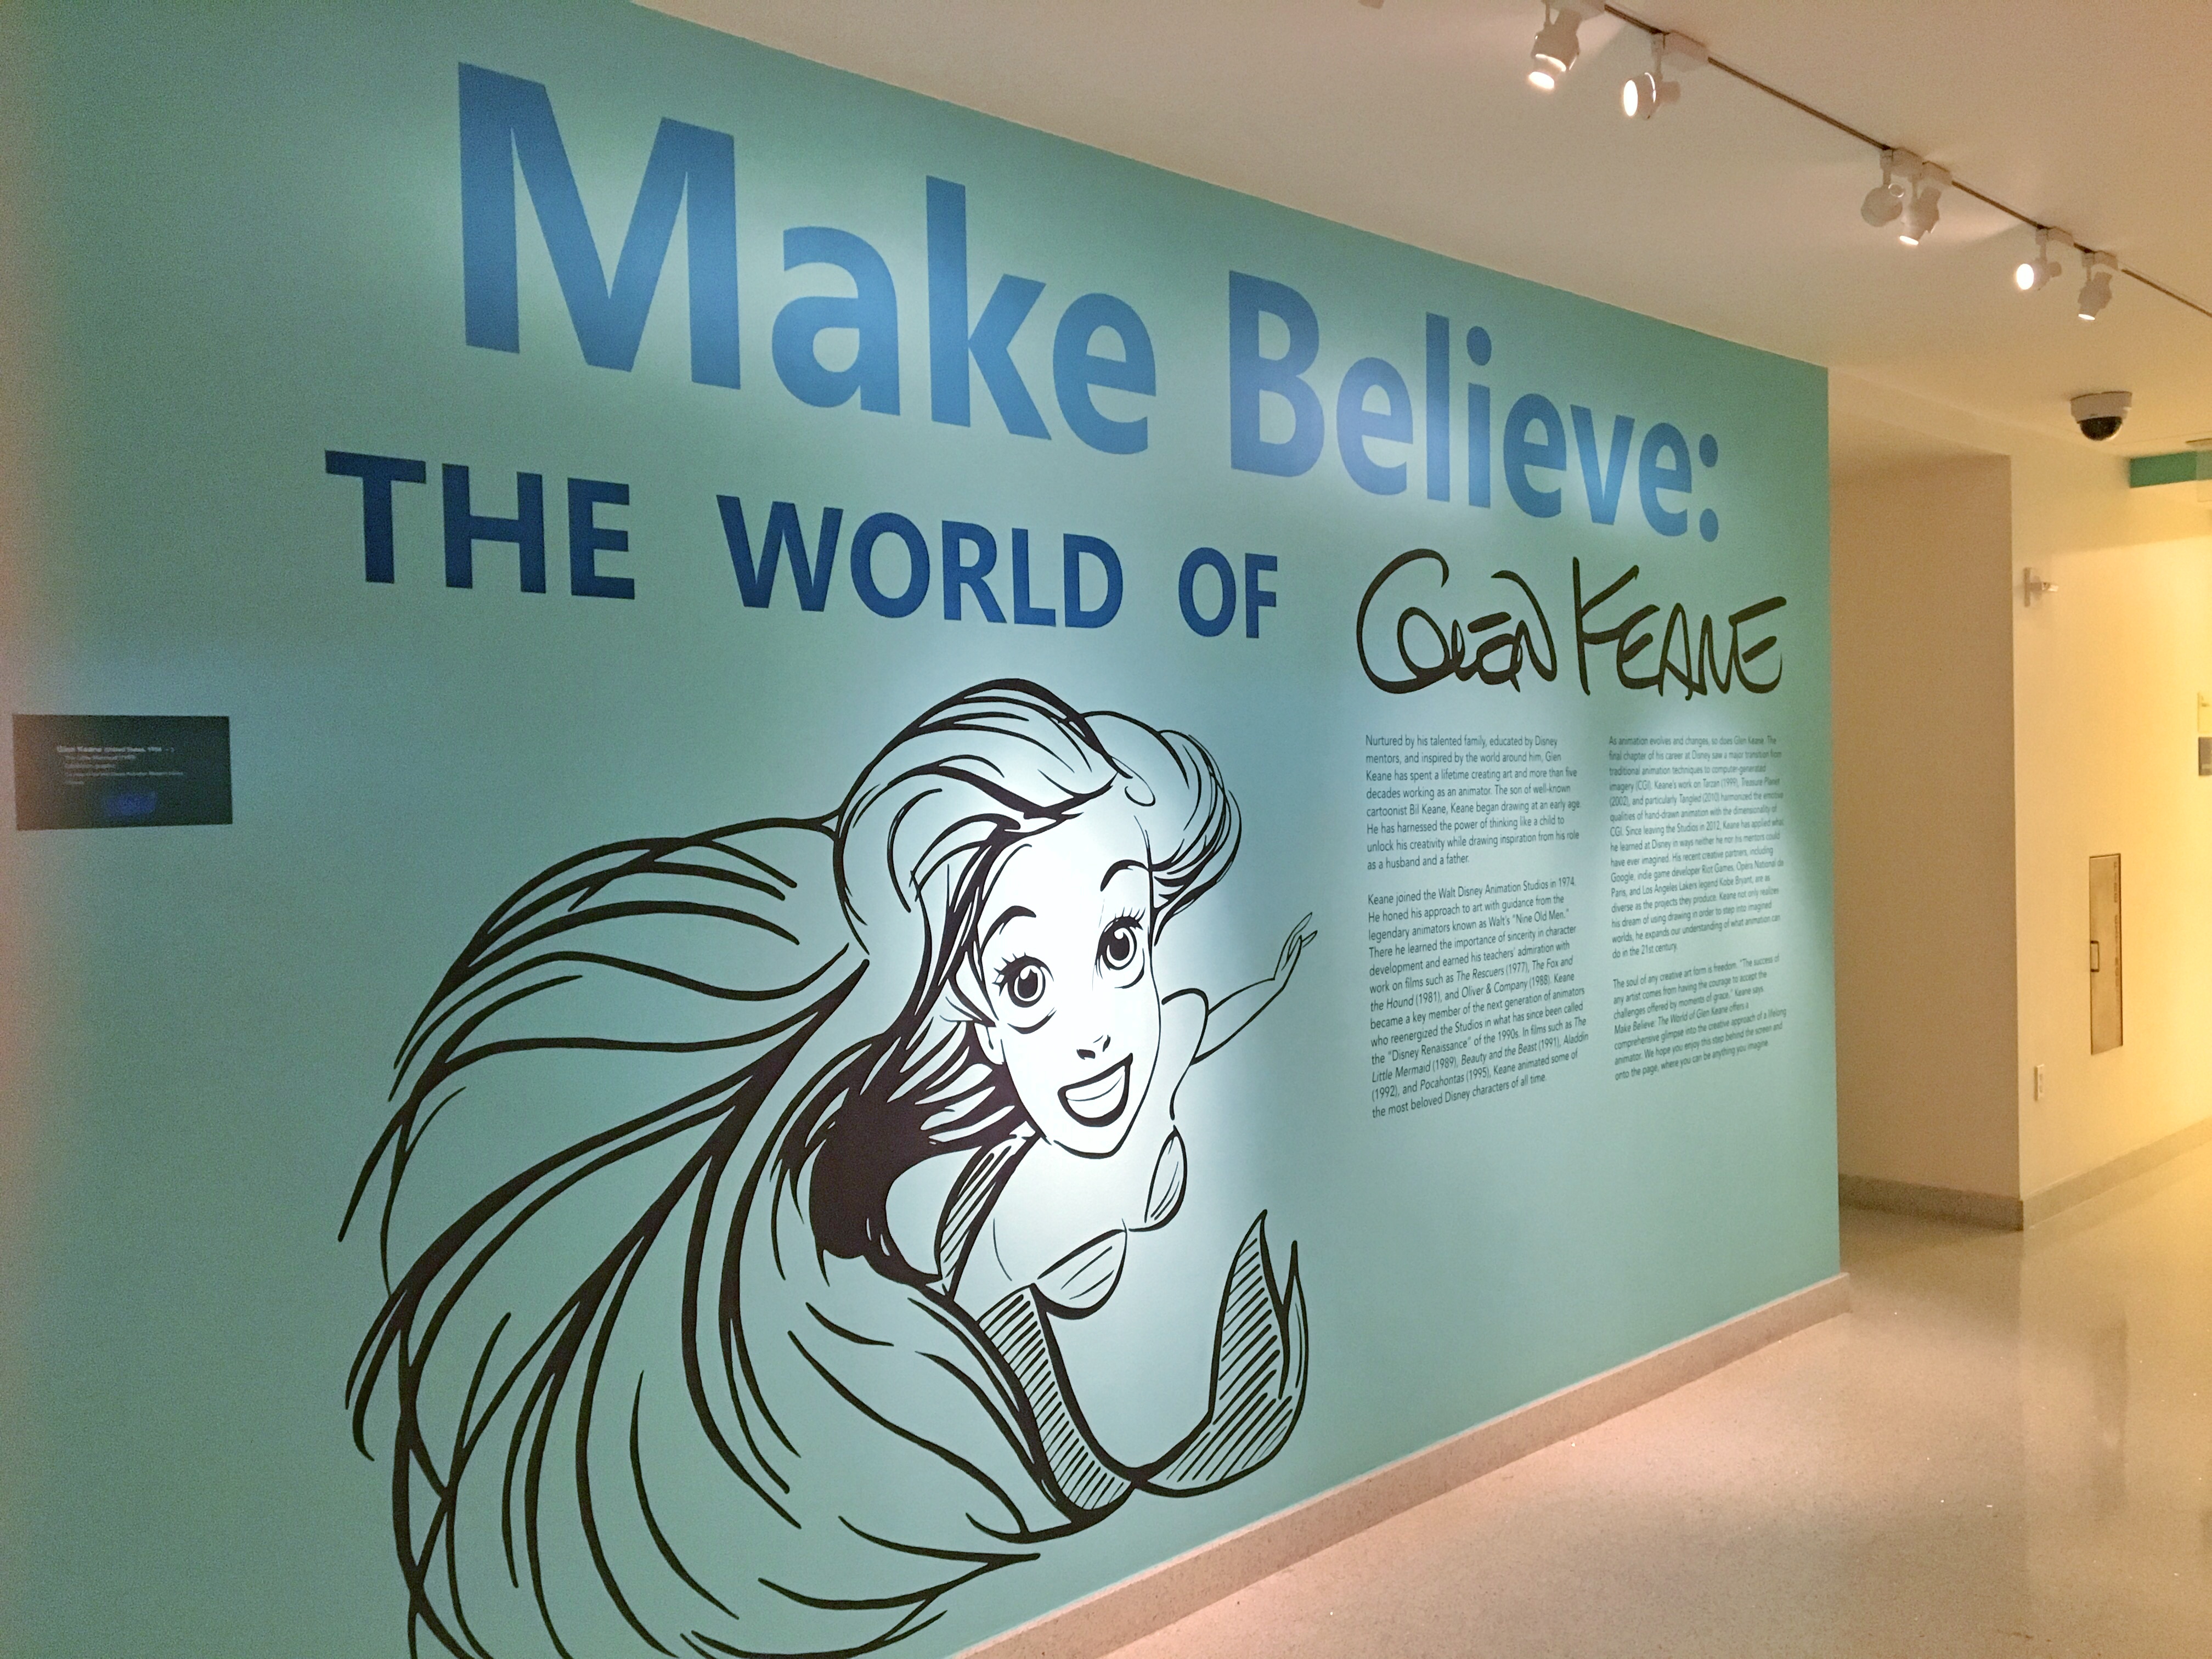 Make Believe: The World of Glen Keane – A New Exhibit at The Walt Disney Family Museum